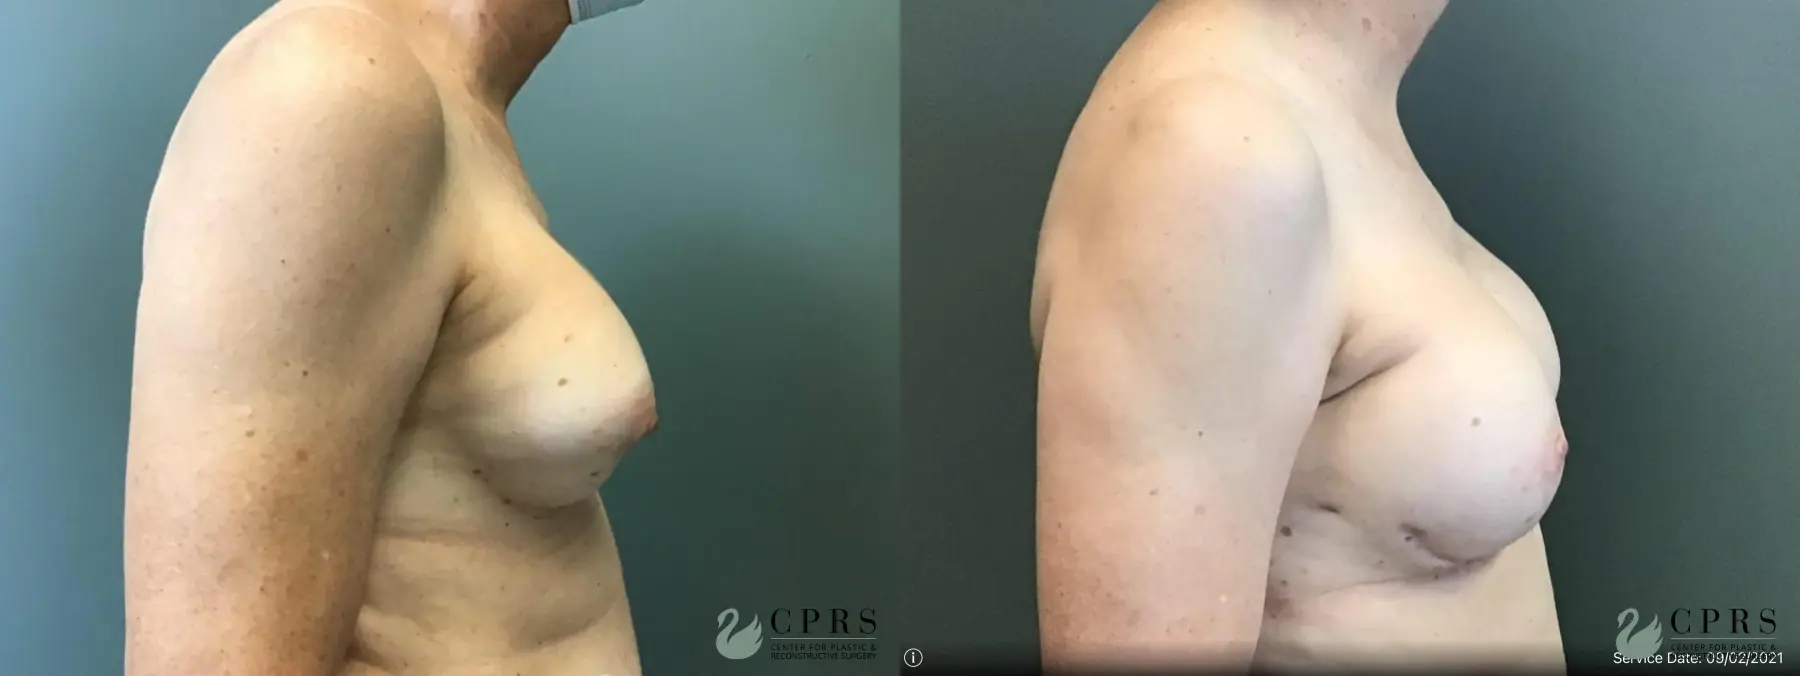 Breast Reconstruction: Patient 7 - Before and After 3